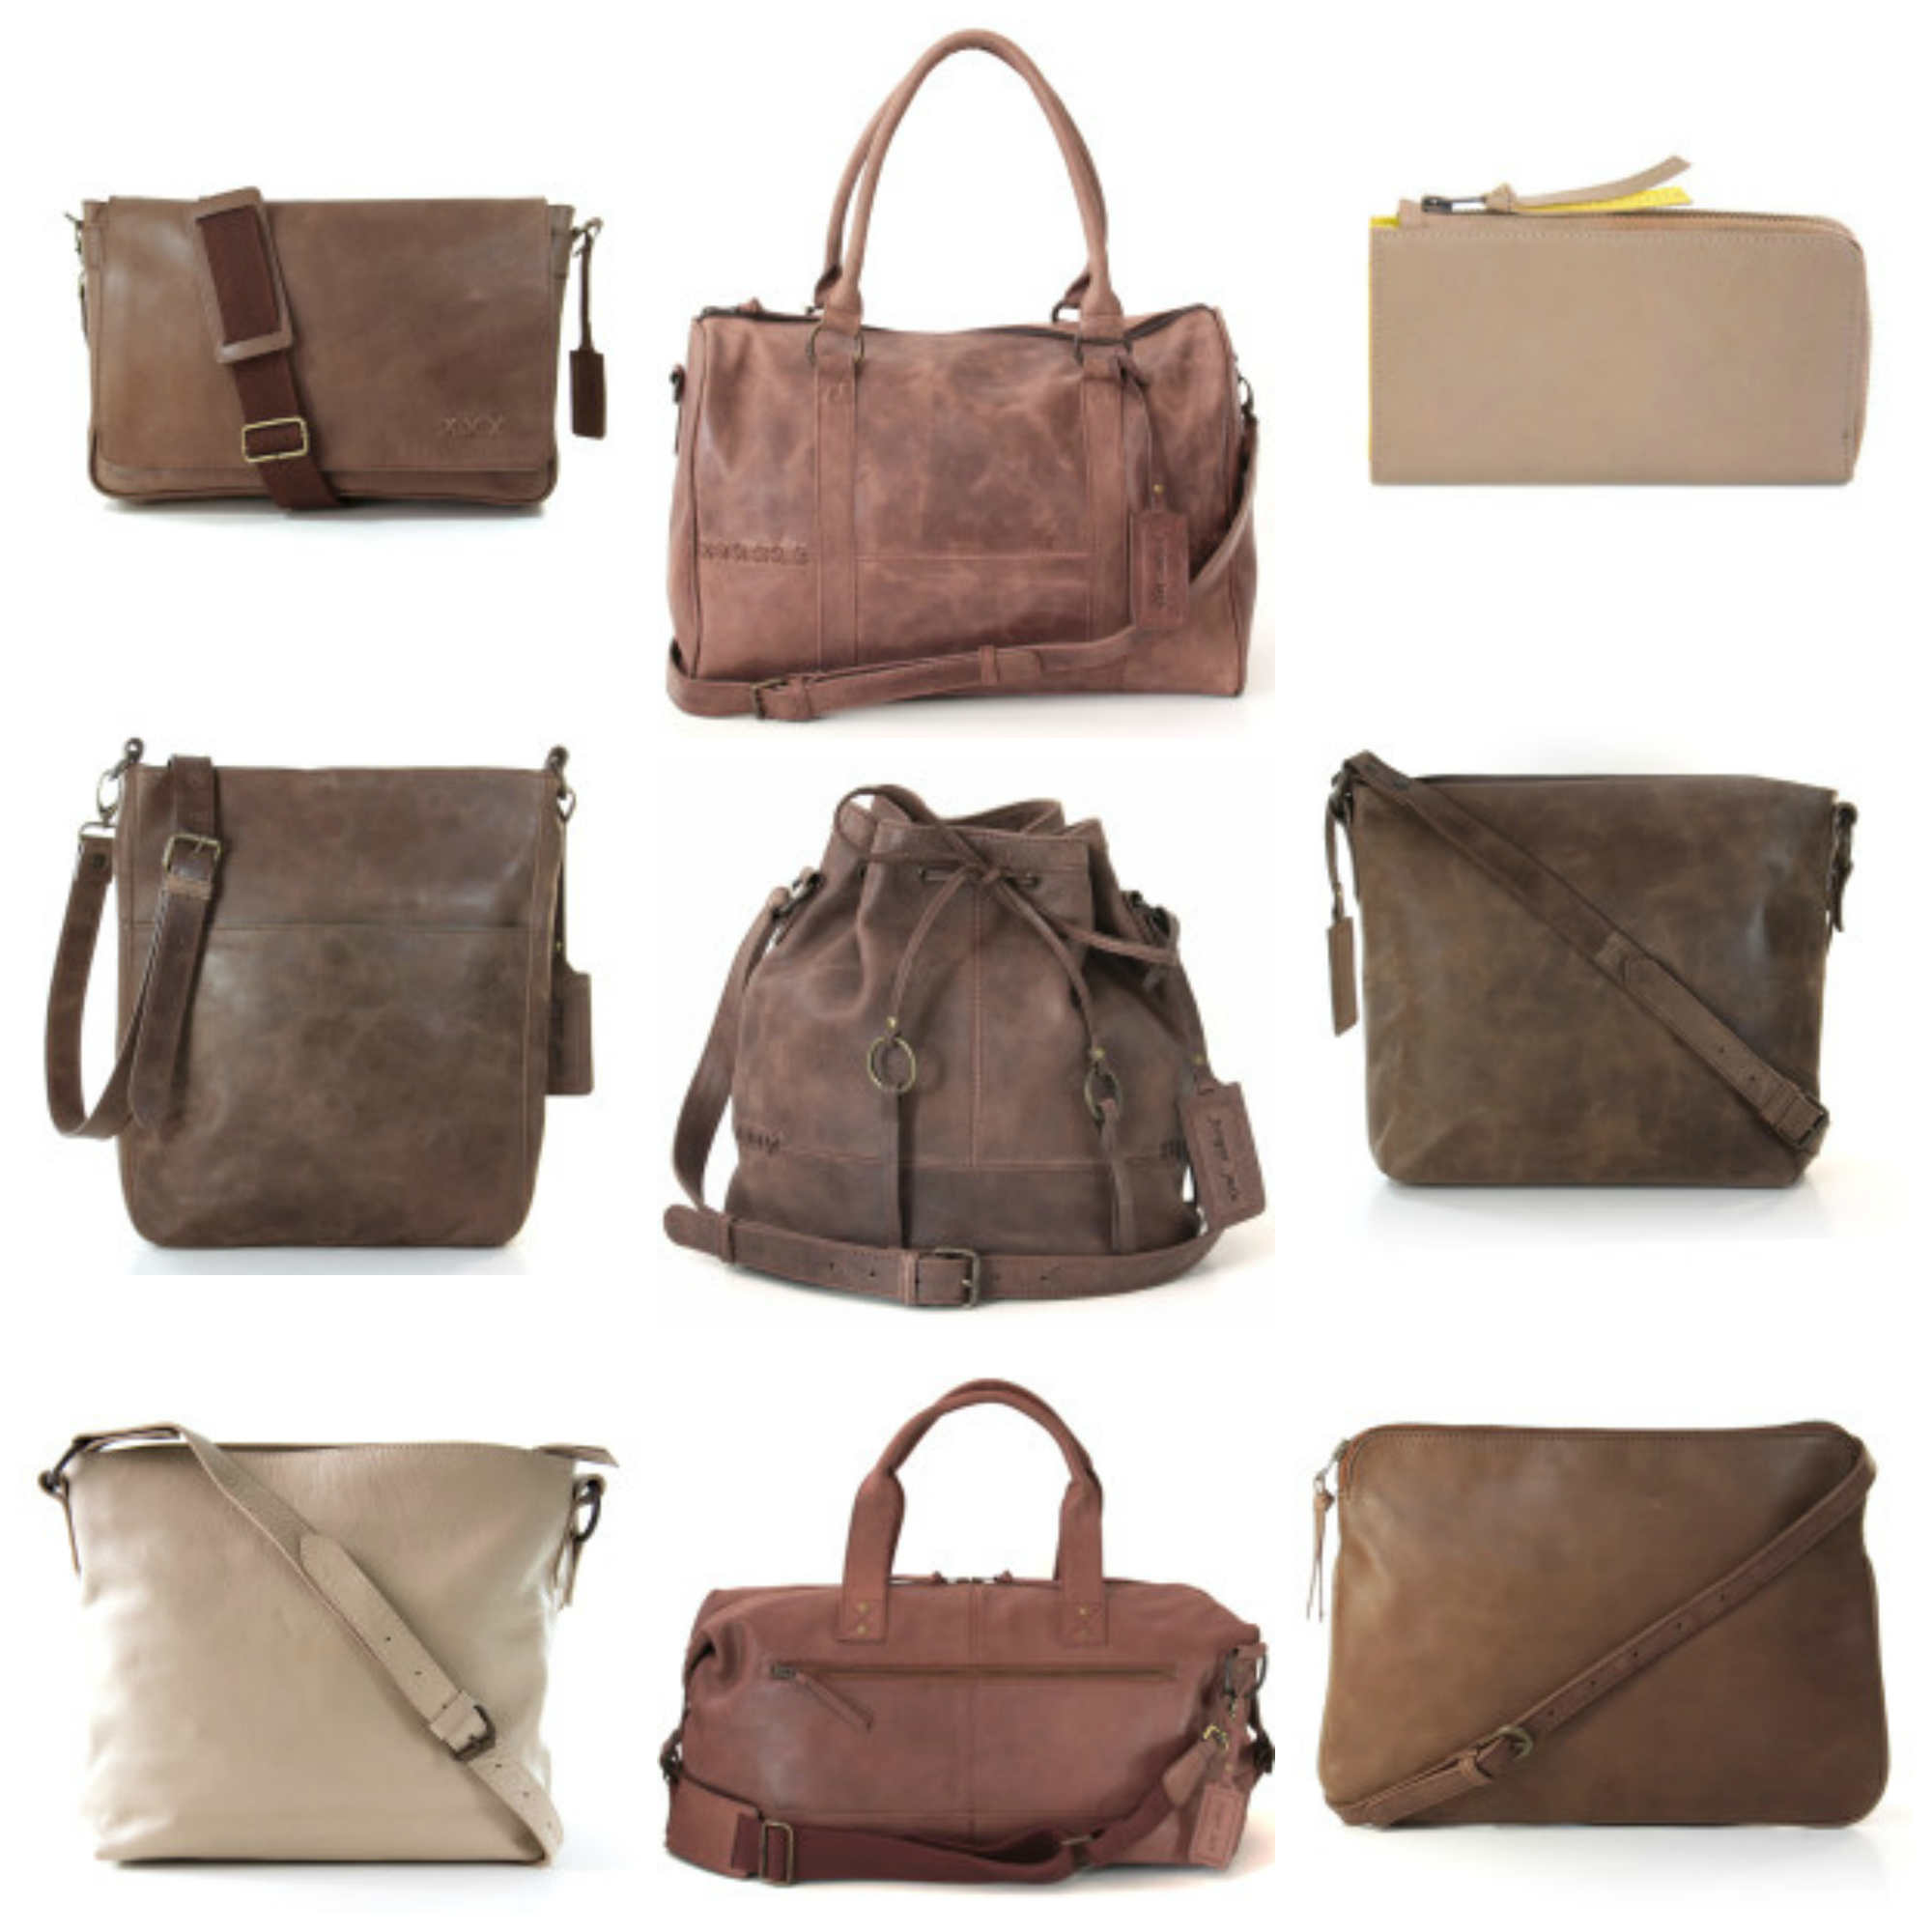 Current obsession: Jinger Jack engraved bags - Pretty Please Charlie